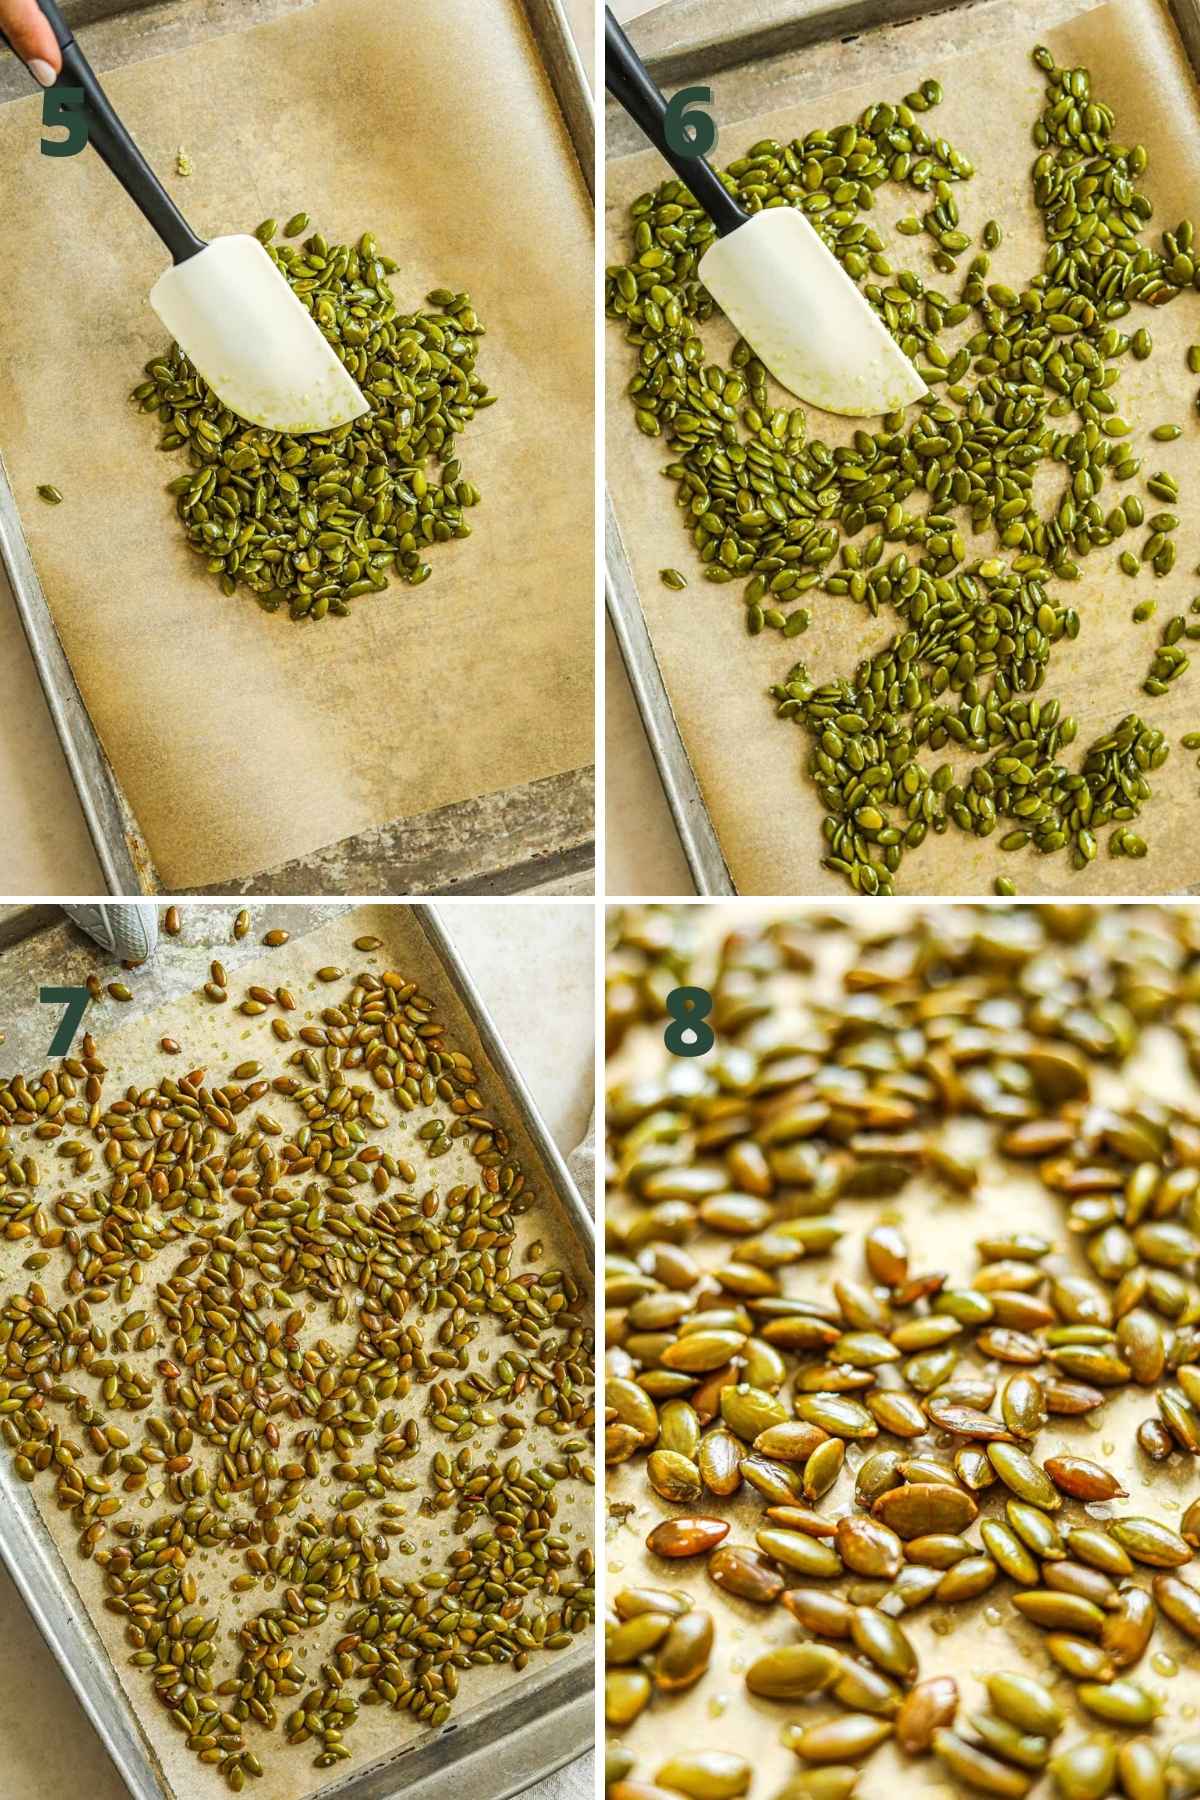 Steps to make roasted pumpkin seeds, like spreading the seeds on a sheet pan, roasting, mixing, and roasting longer, then serving for salads, a snack, and more.